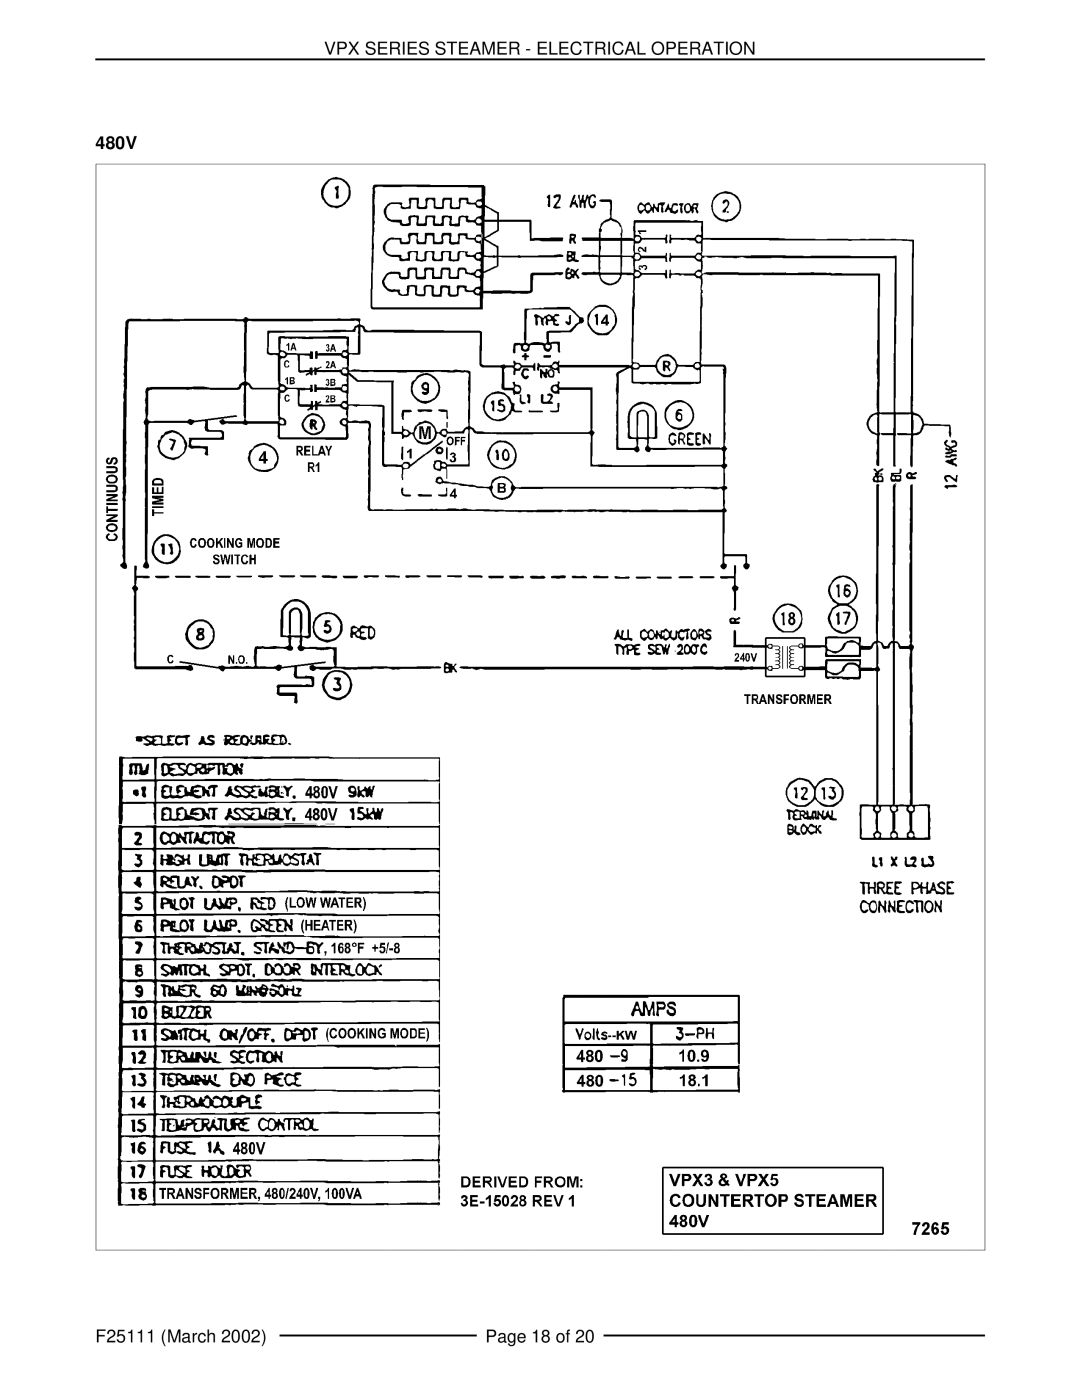 Vulcan-Hart VPX3 126586, VPX5 126588 manual Vpx Series Steamer - Electrical Operation, F25111 March, Page 18 of 